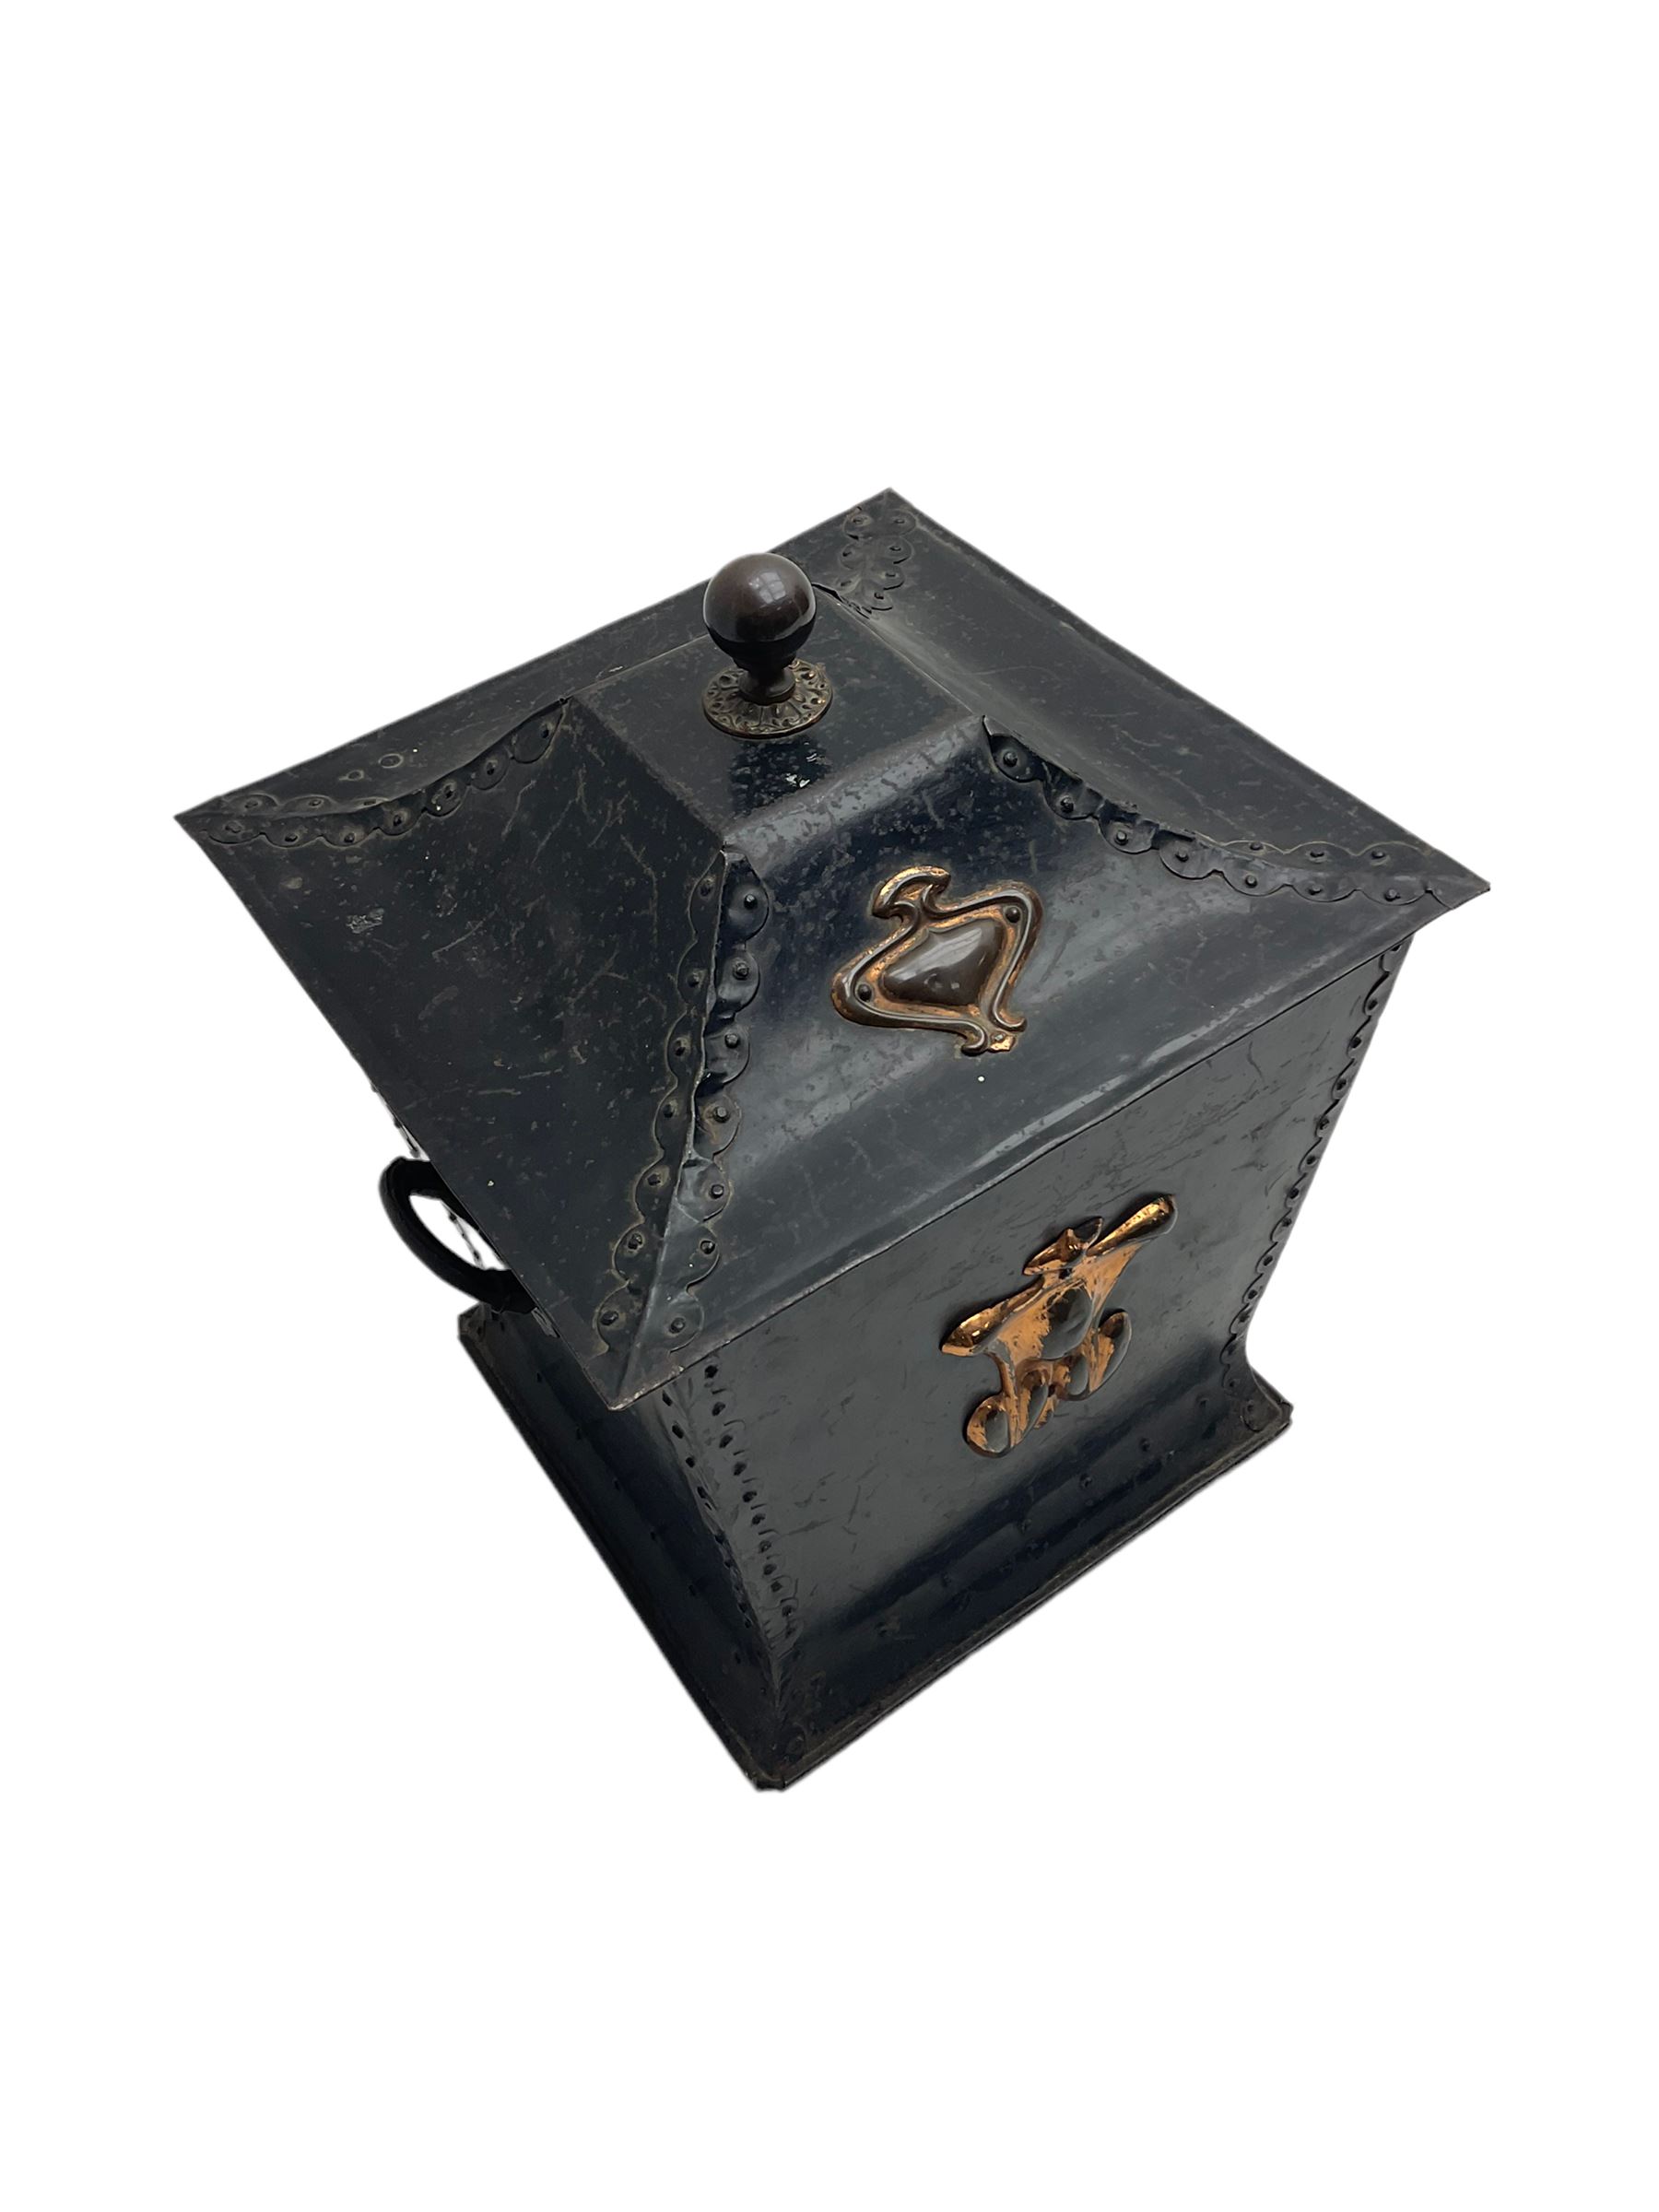 Art Nouveau period metal coal bucket with hinged lid - Image 8 of 9